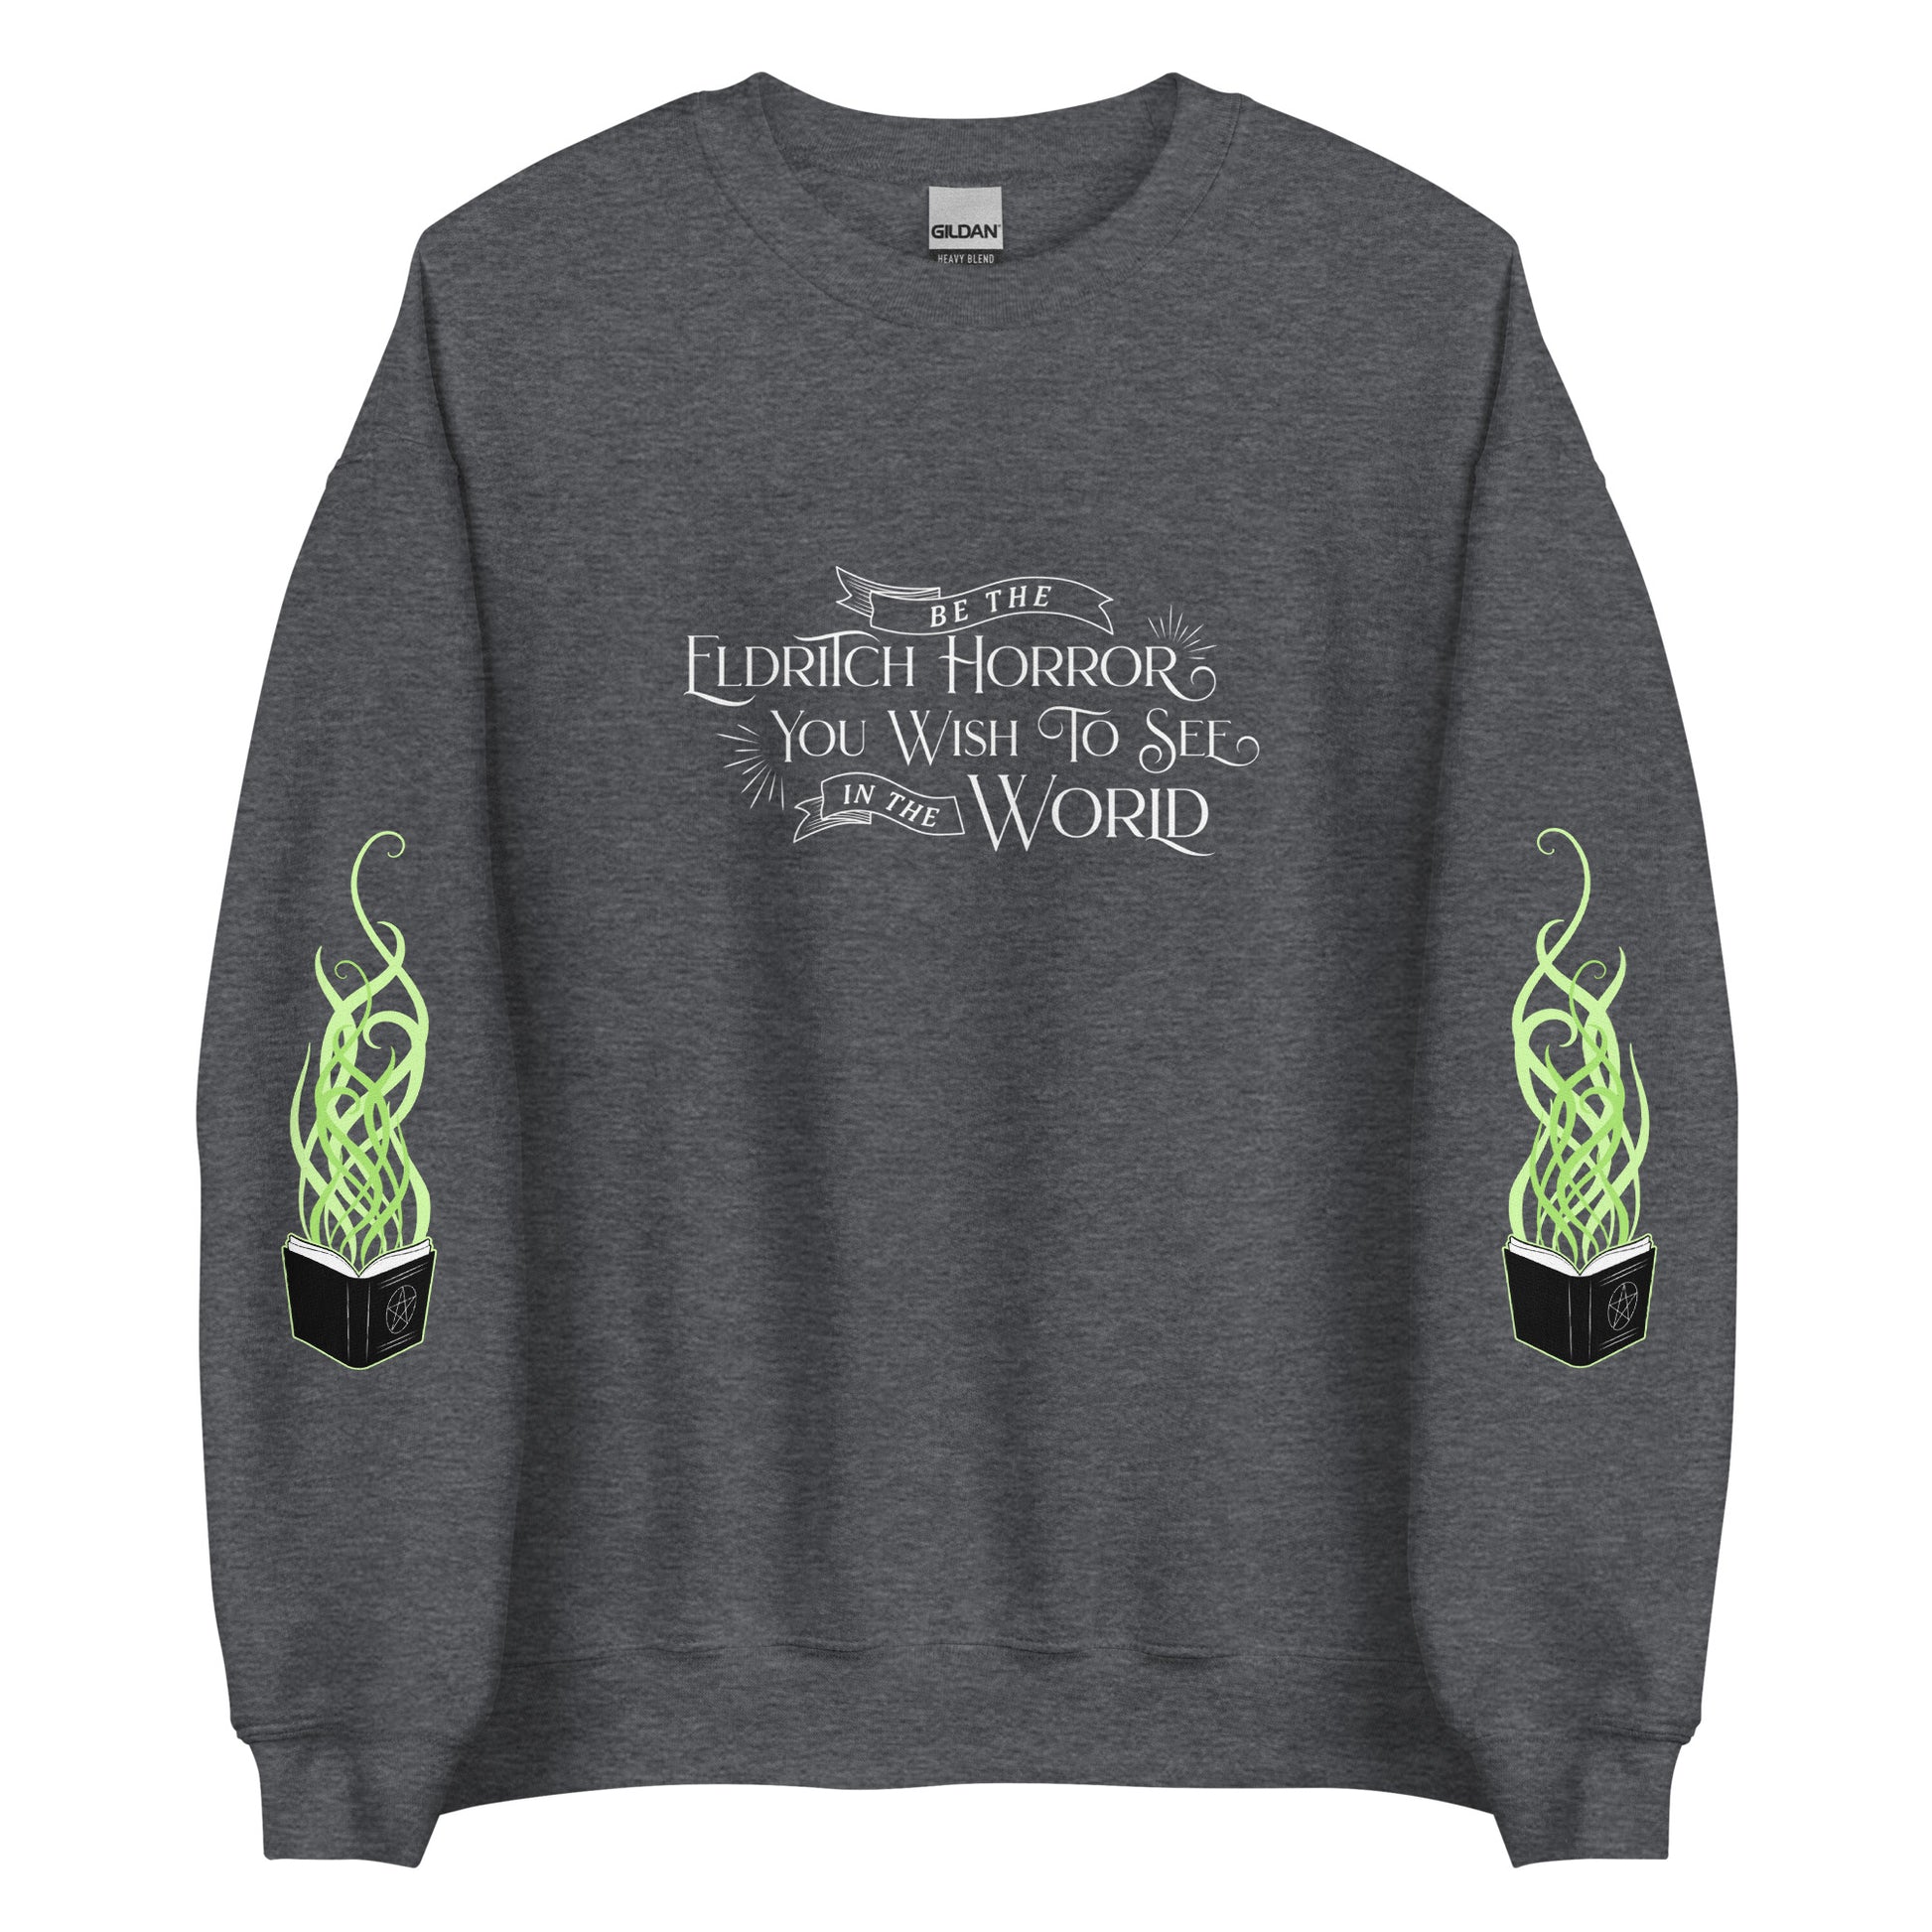 A dark heather grey crewneck sweatshirt with white old-fashioned text on the chest that reads "Be The Eldritch Horror You Wish To See In The World". On each sleeve is an illustration of a spellbook with green magical tendrils spreading upward from the pages.